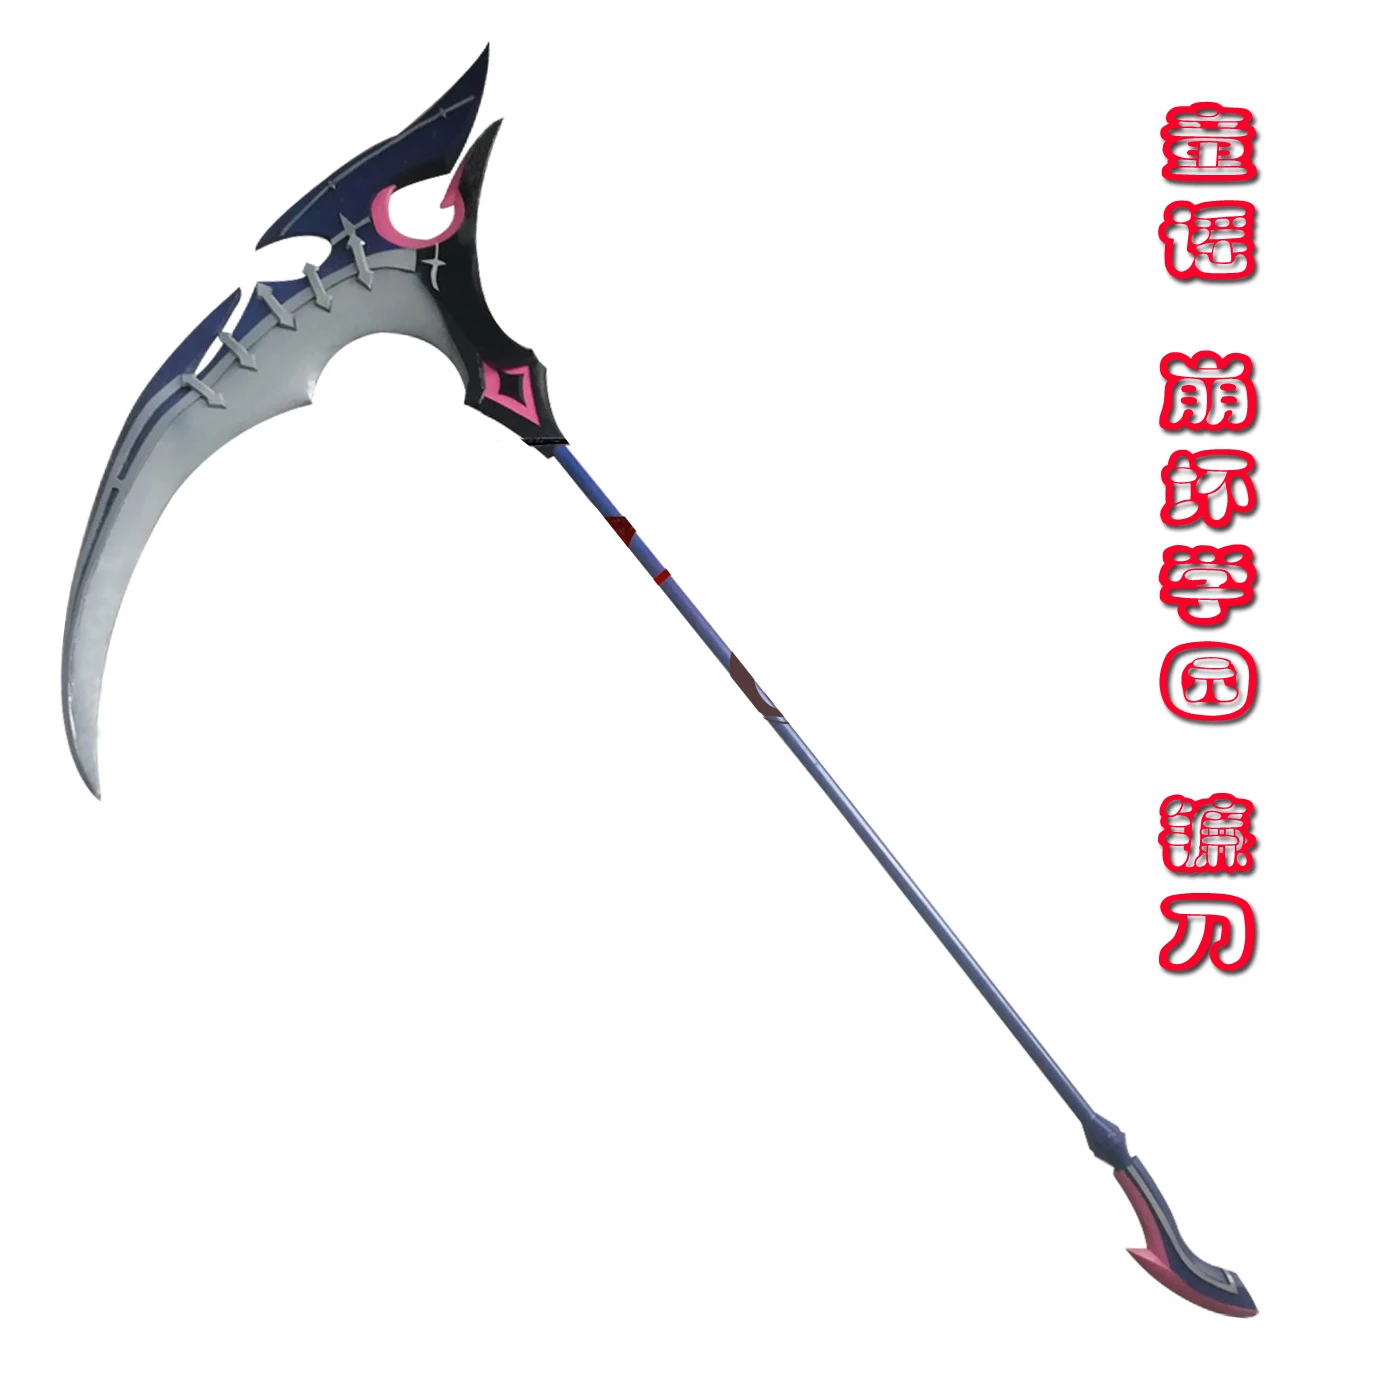 Hot Game Honkai Impact 3 cosplay weapons props nursery rhyme Sickle for Halloween Christmas Party Masquerade Anime Shows | Тематическая